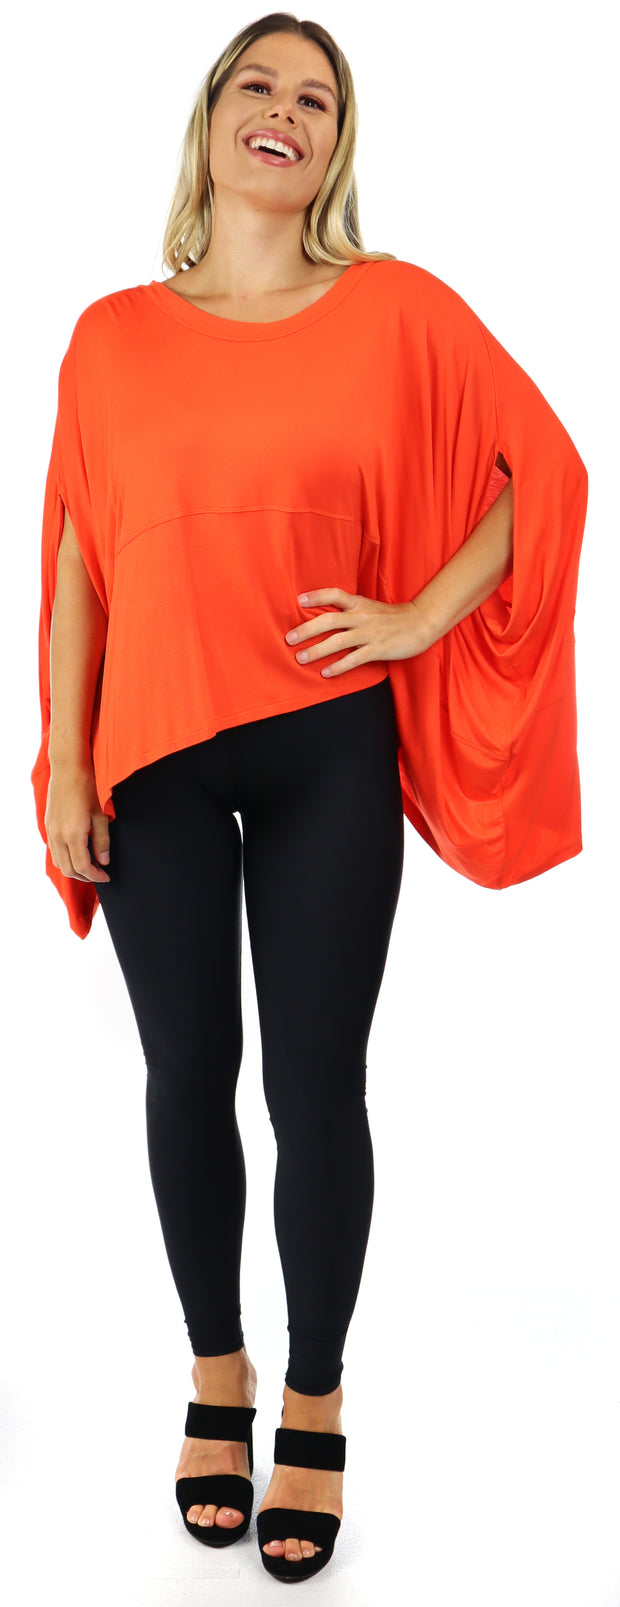 Oversized poncho Top, Fit Small to 3XL, Hip Hop Tunic, Boho Top, Casual top, Summer tunic, Plus size top, Women tunic.